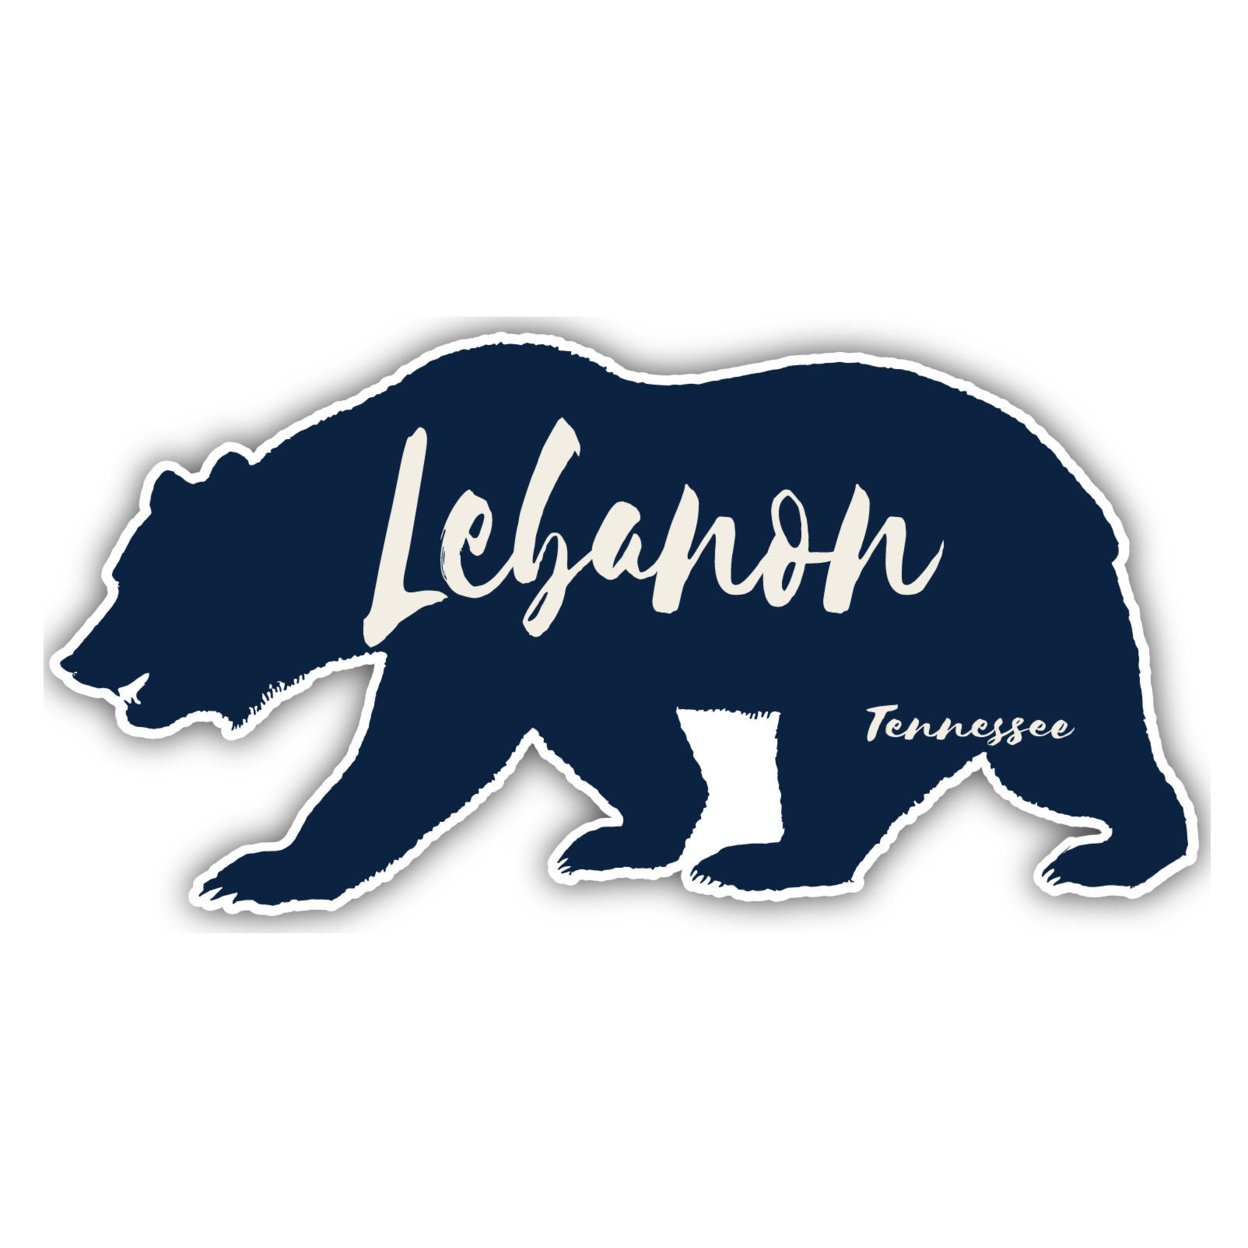 Lebanon Tennessee Souvenir Decorative Stickers (Choose Theme And Size) - 4-Inch, Tent